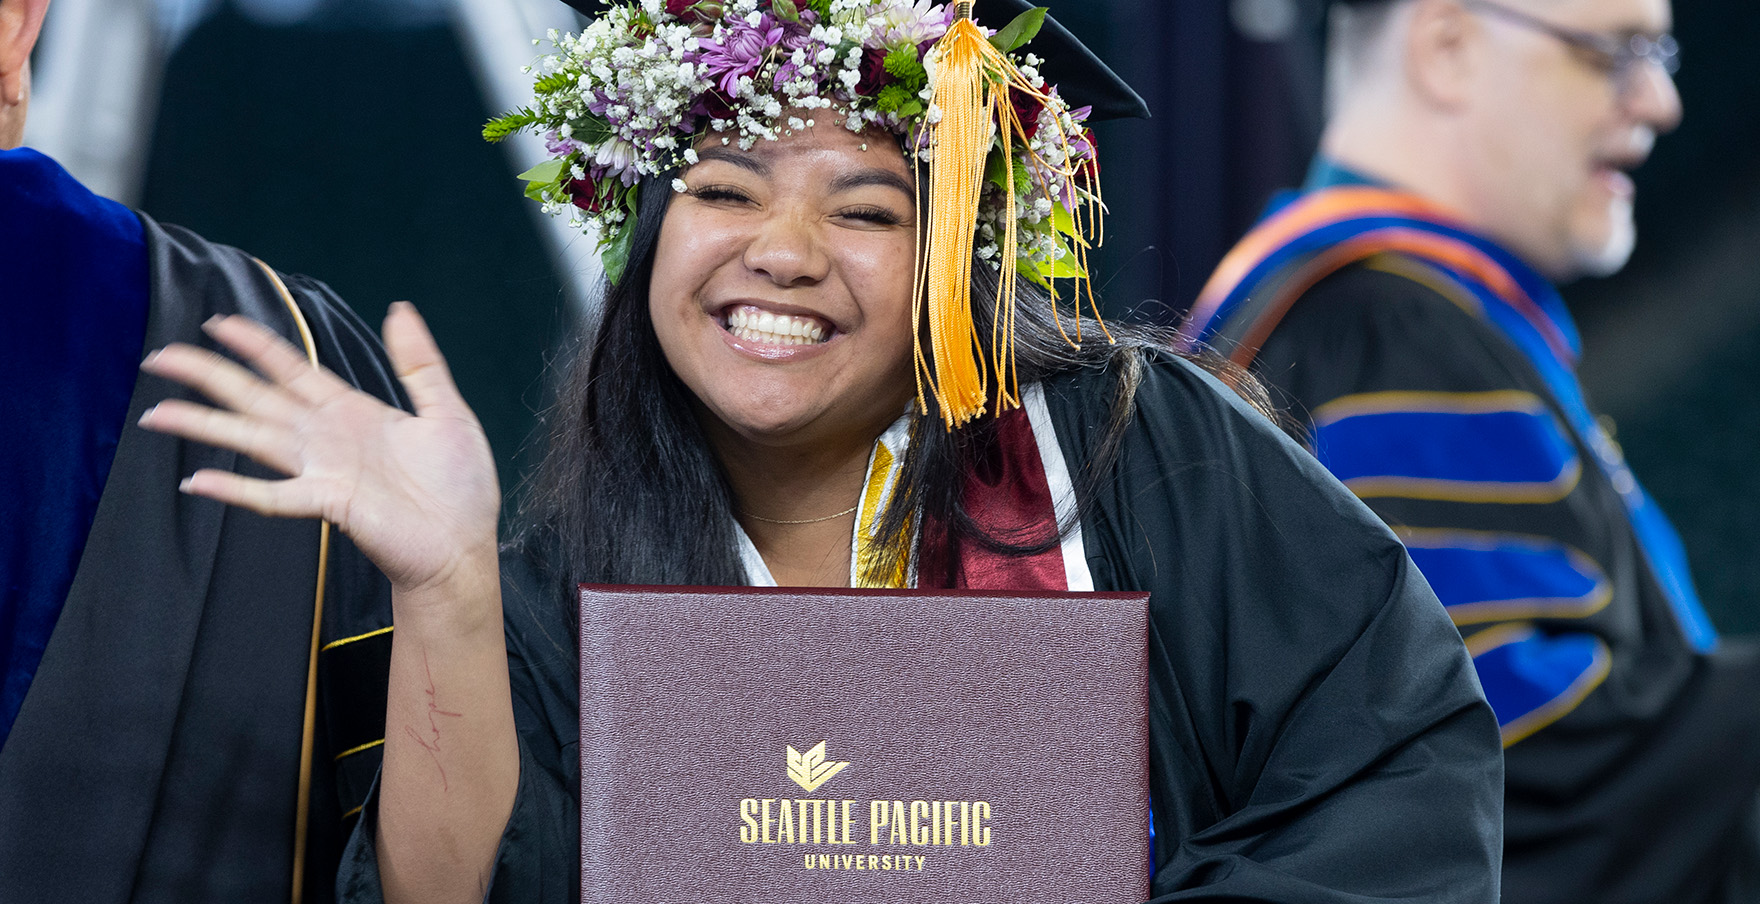 An SPU student smiles and waves with her diploma | photo by Mike Siegel